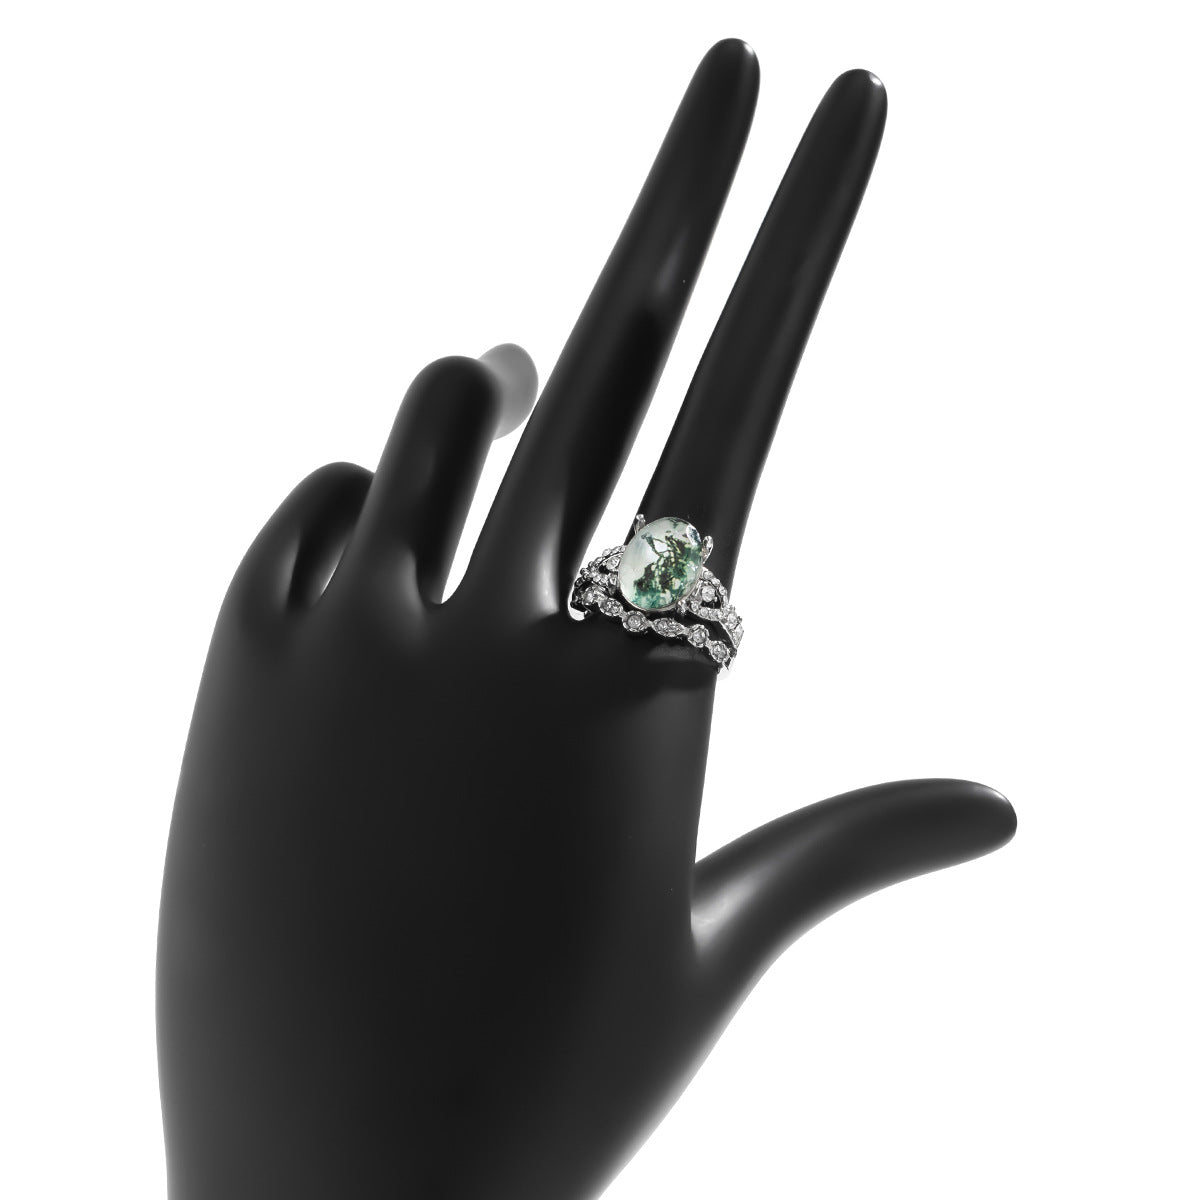 V-Shaped Glass Landscape Ring Set with Full Rhinestones in Vienna Verve Collection - Women's Jewelry